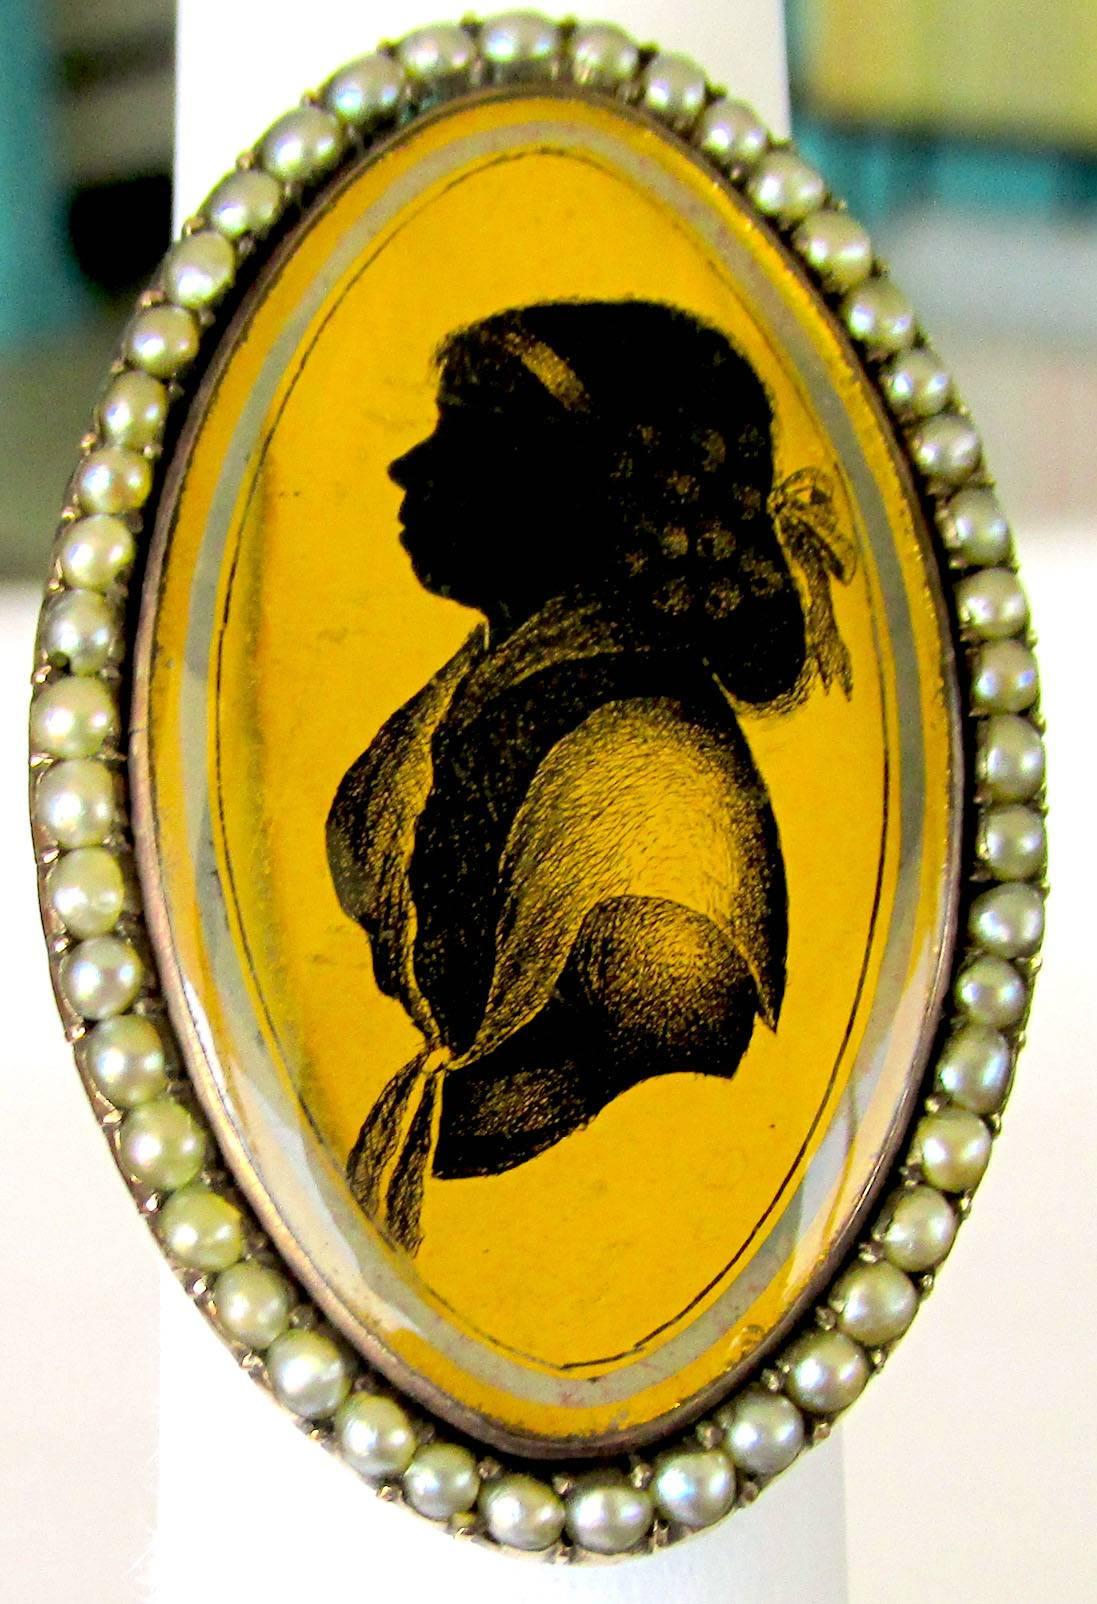 Exquisite Georgian verre églomisé, or gilded glass, portrait ring surrounded by seed pearls. Verre églomisé is a French term meaning gilded glass and is a decorative technique in which the back side of glass is gilded with gold leaf. The gilding